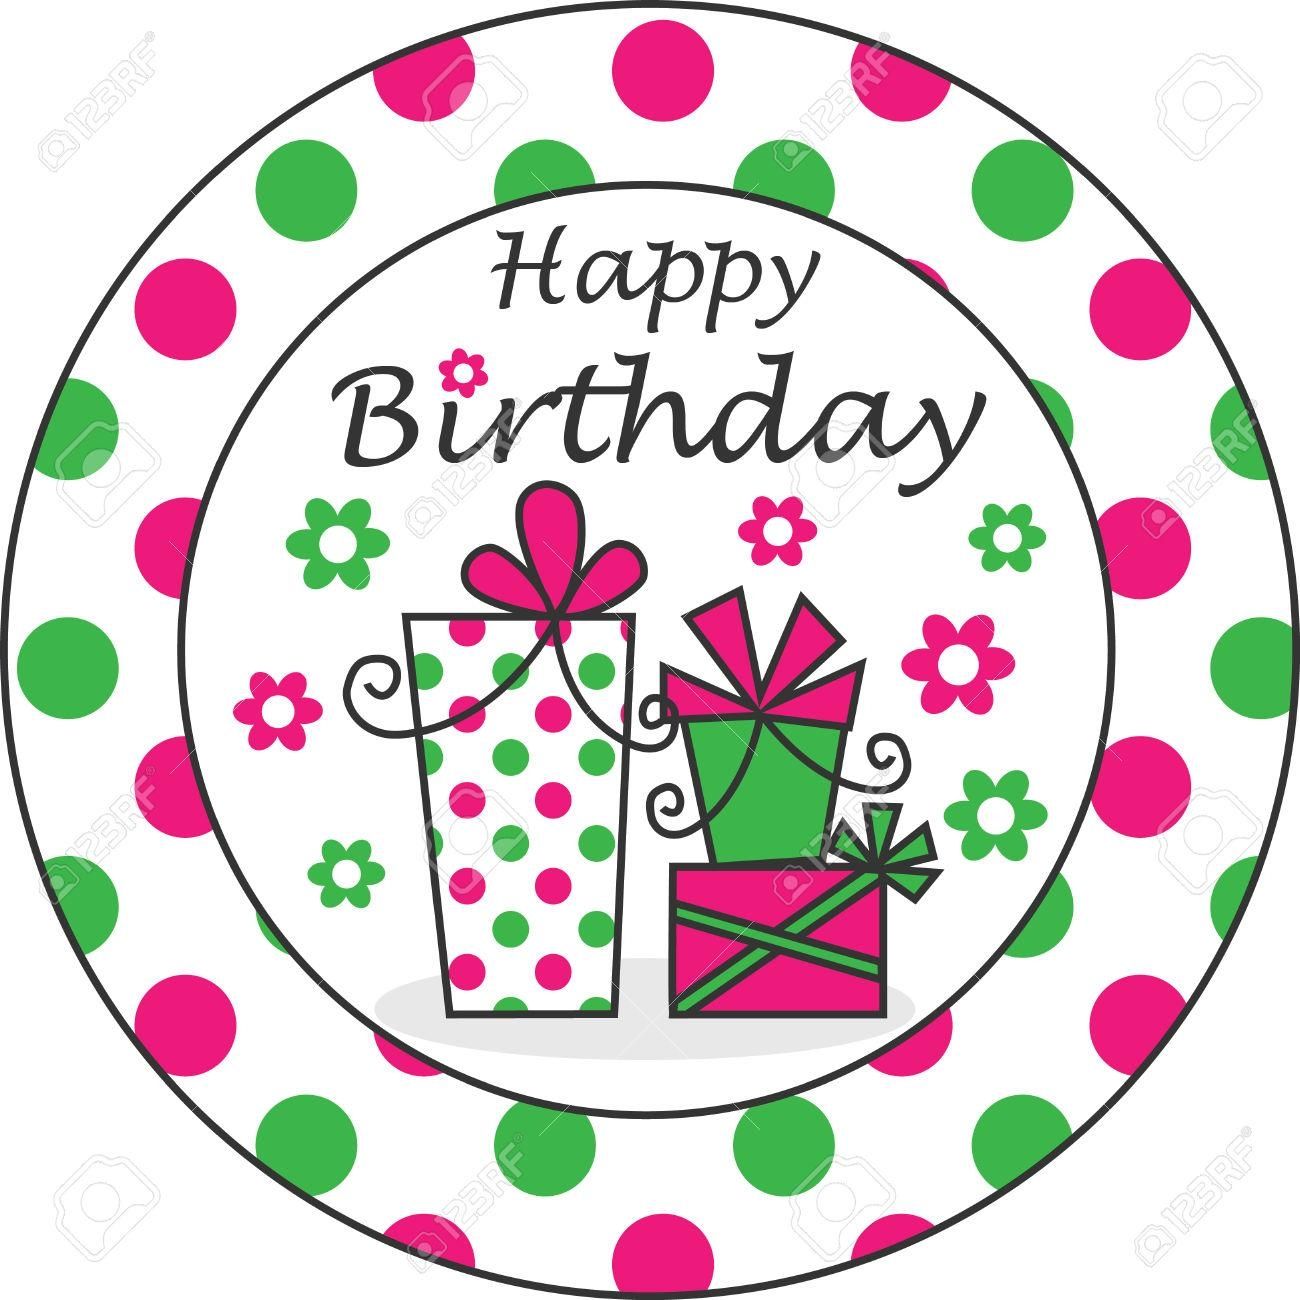 Happy Birthday Banners Wall Decorations Royalty Free Cliparts With Regard To Happy Birthday Wall Art (View 20 of 20)